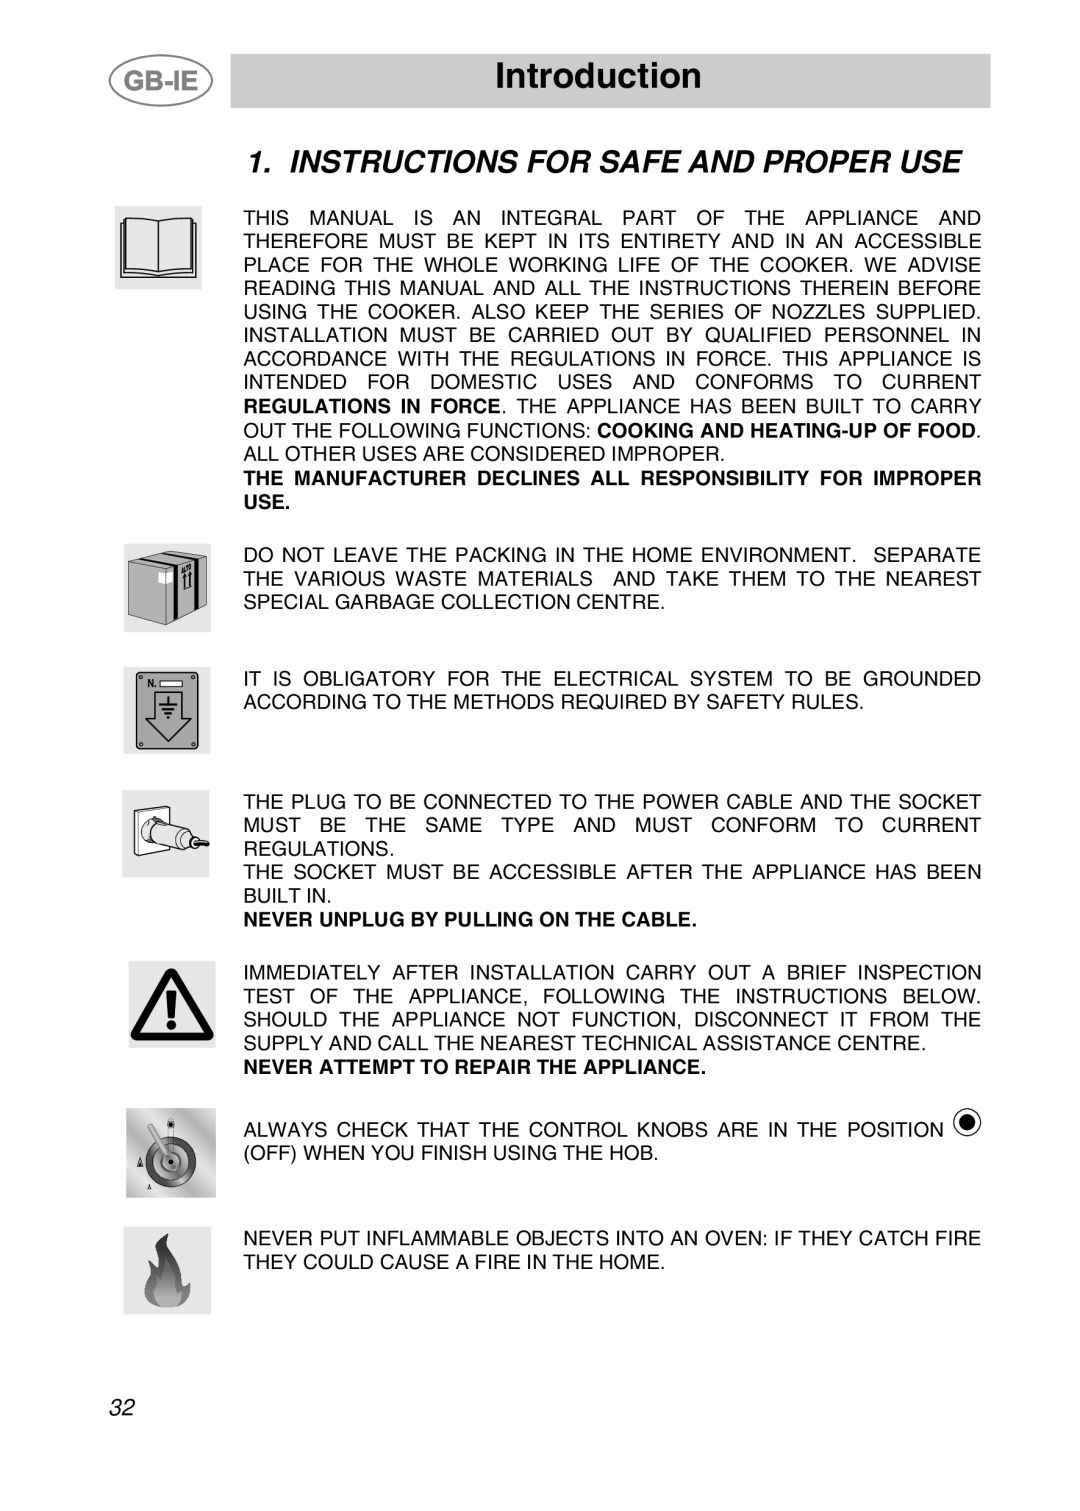 Smeg CS71-5 manual Introduction, Instructions For Safe And Proper Use, Never Unplug By Pulling On The Cable 